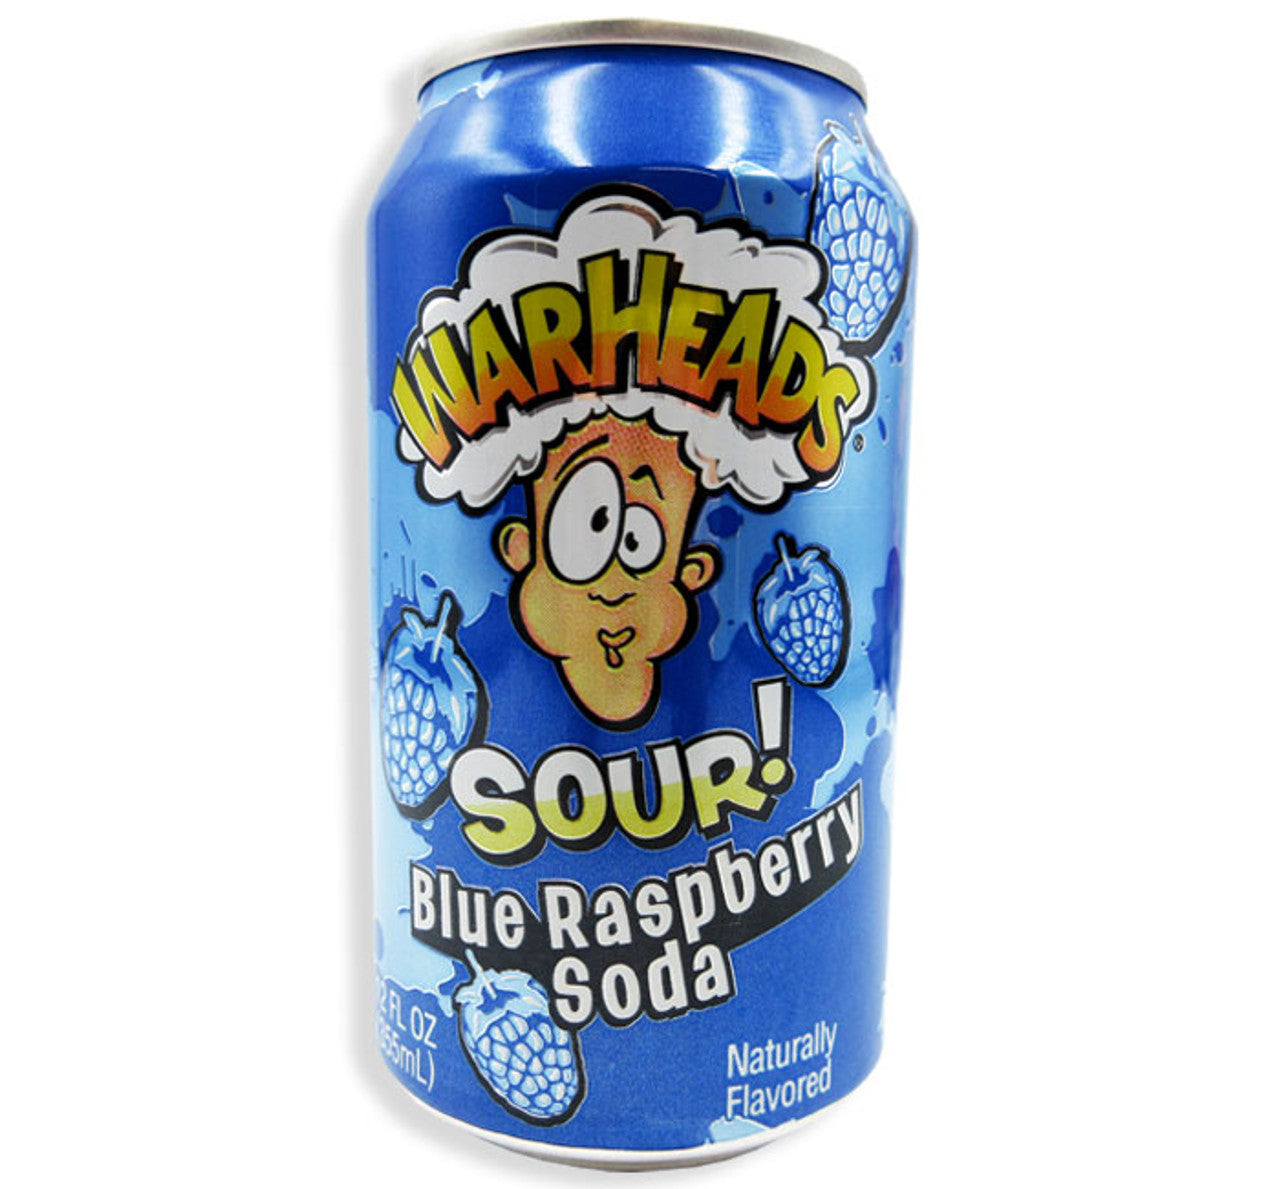 Warheads Soda Cans  Pixie Candy Shoppe Sour blue raspberry  